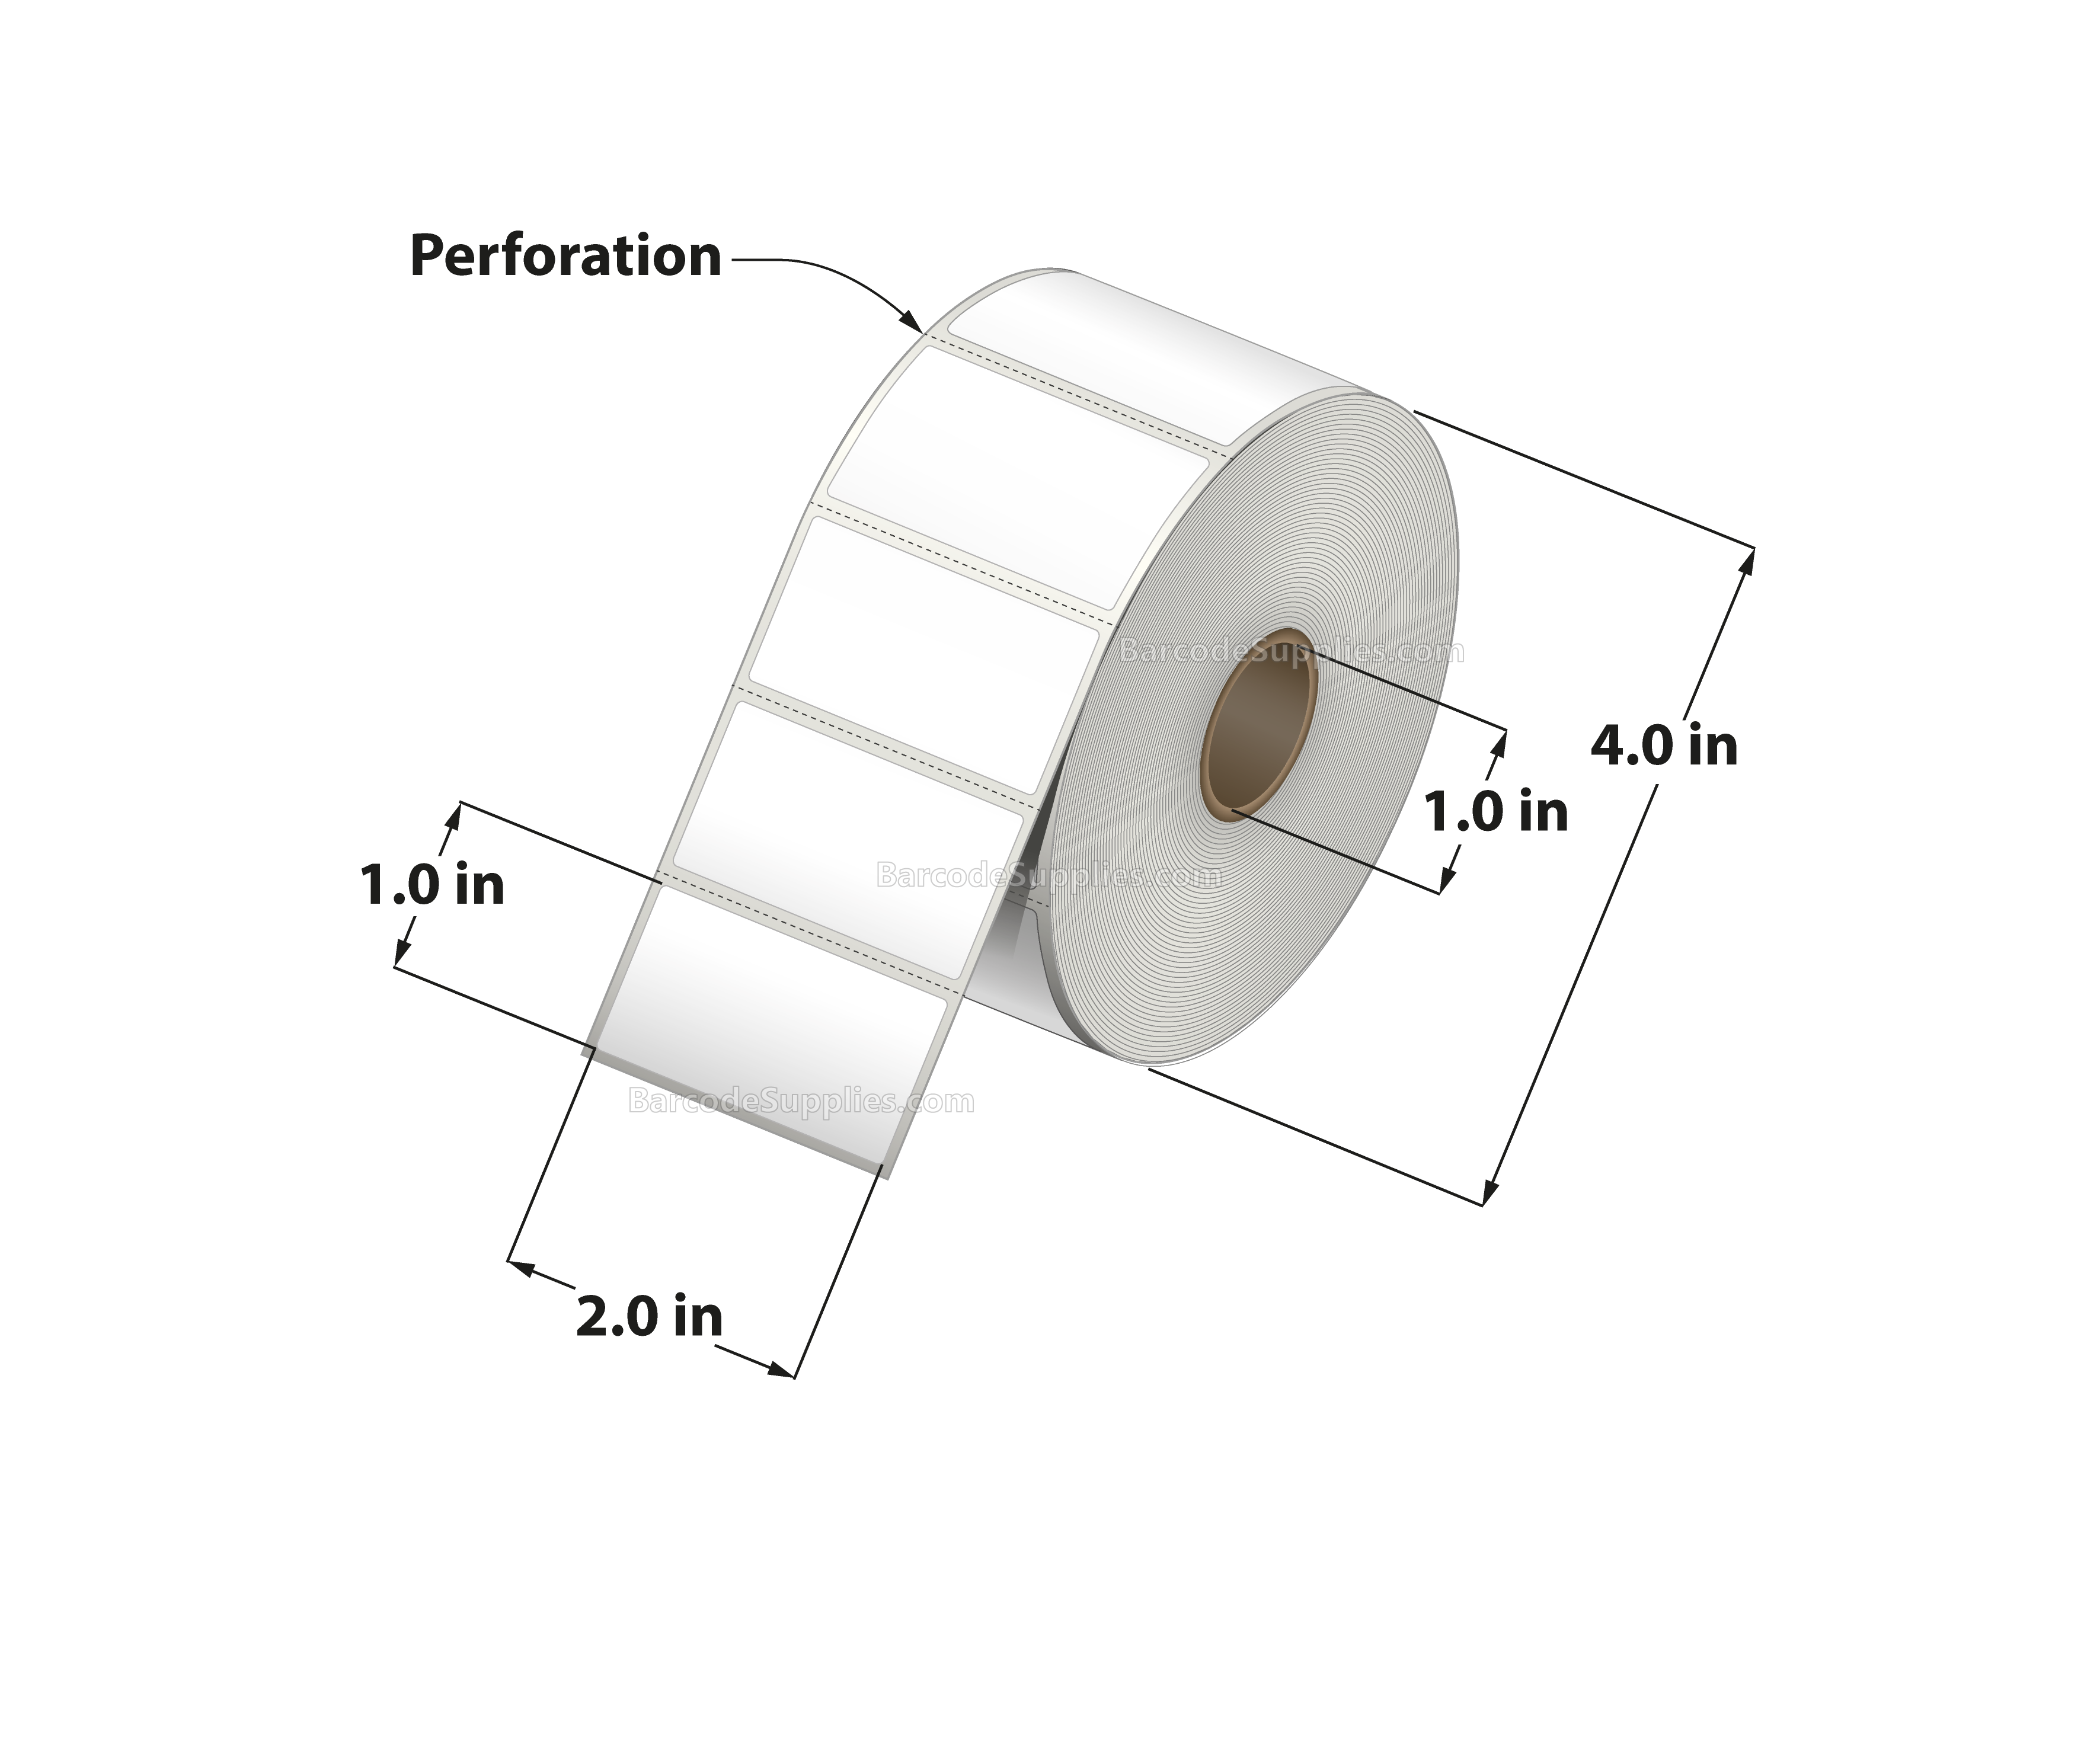 2 x 1 Thermal Transfer White Labels With Permanent Adhesive - Perforated - 1375 Labels Per Roll - Carton Of 12 Rolls - 16500 Labels Total - MPN: RT-2-1-1375-1 - BarcodeSource, Inc.